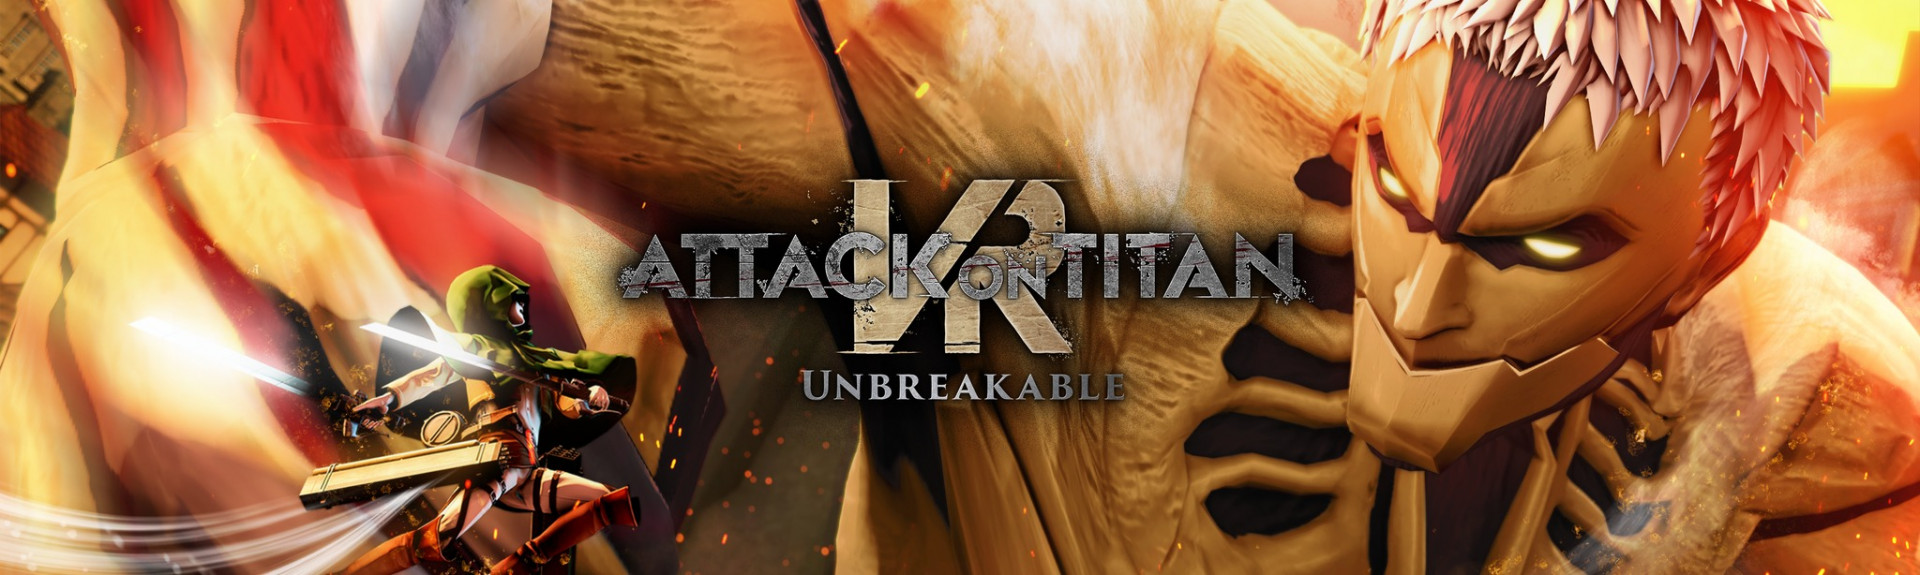 Attack on Titan VR: Unbreakable